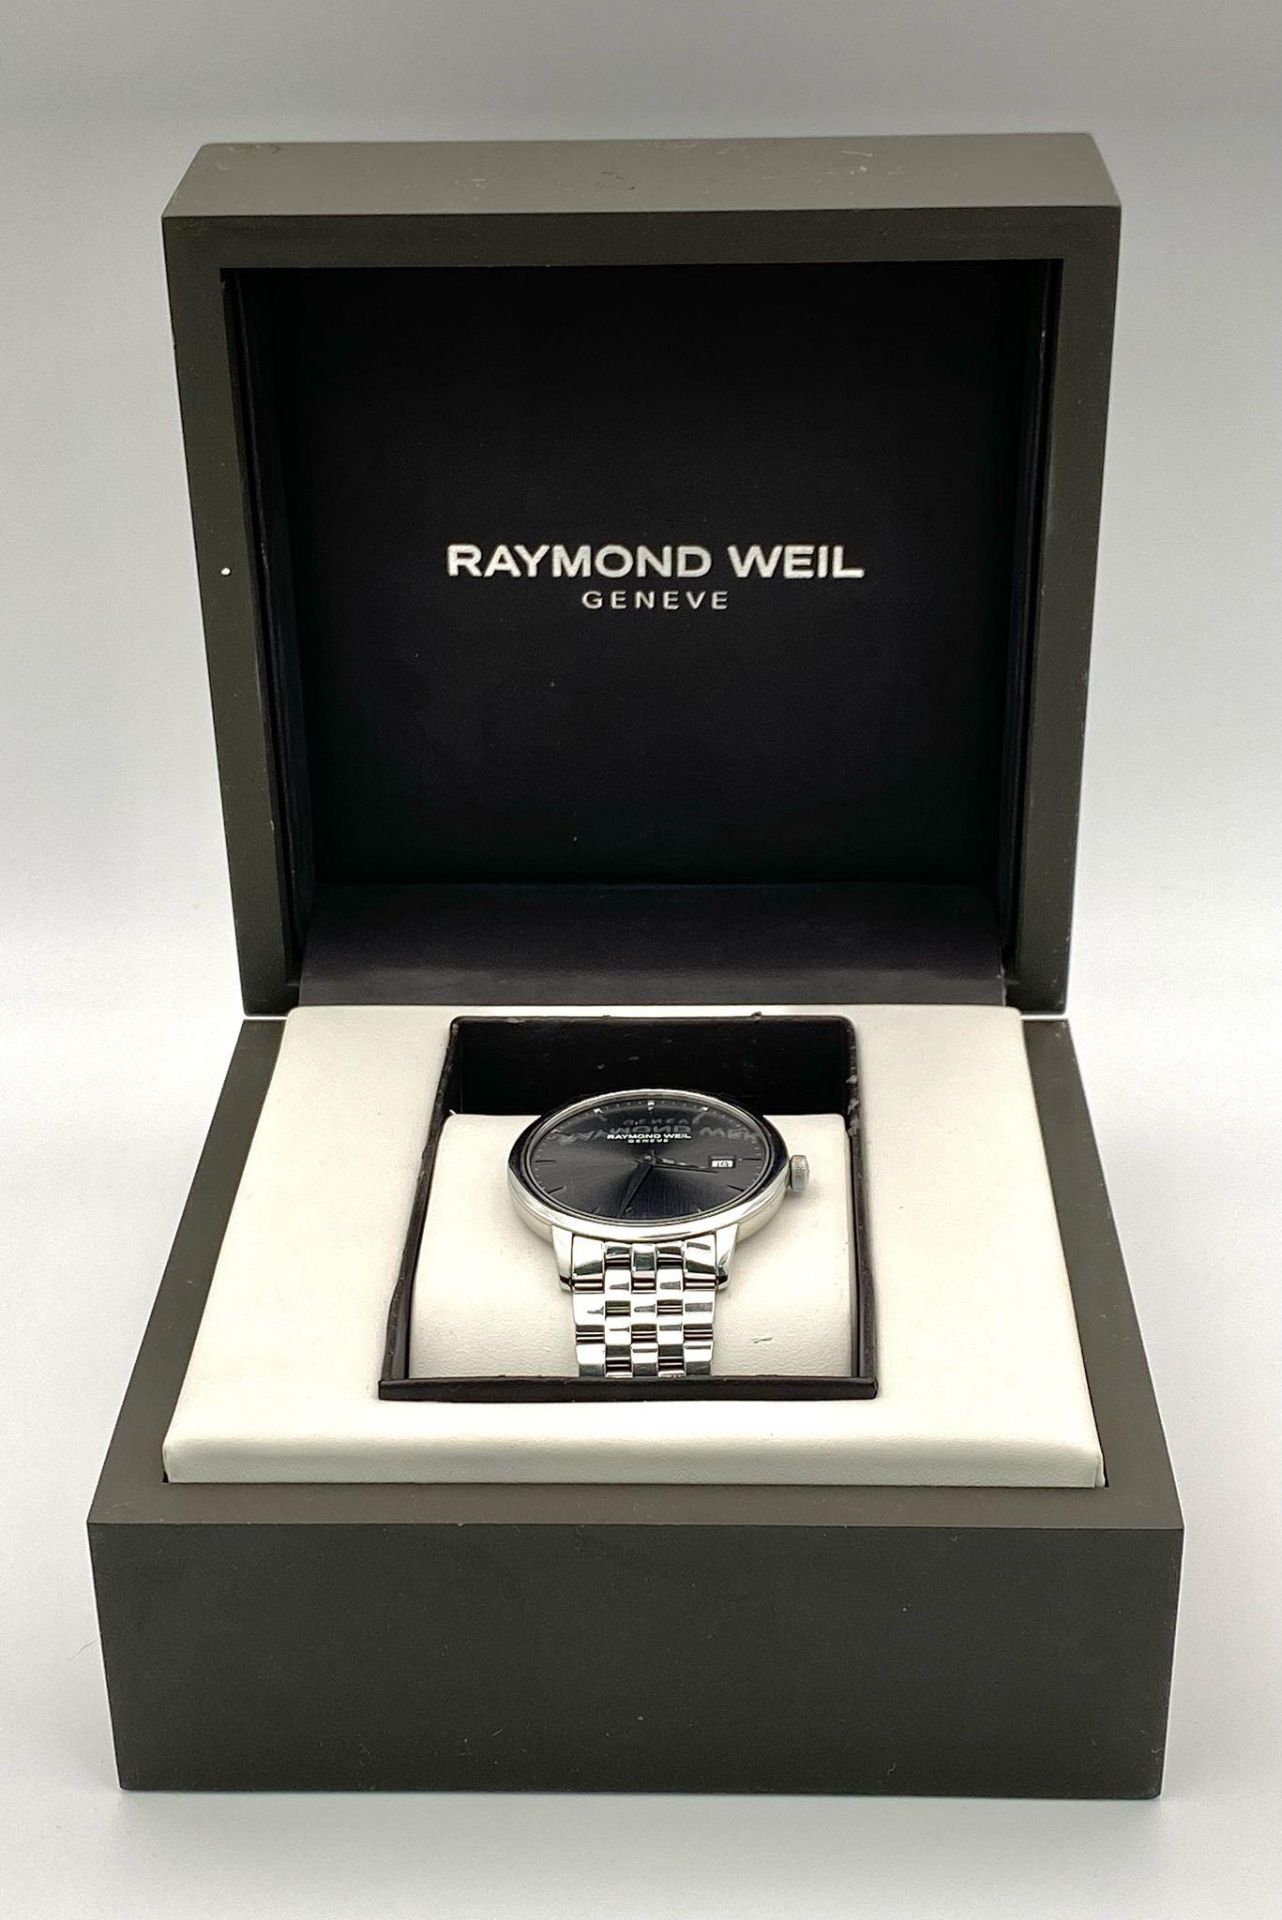 A Classic Raymond Weil Geneve Quartz Gents Watch. Stainless steel bracelet and case - 39mm. Silver - Image 6 of 10